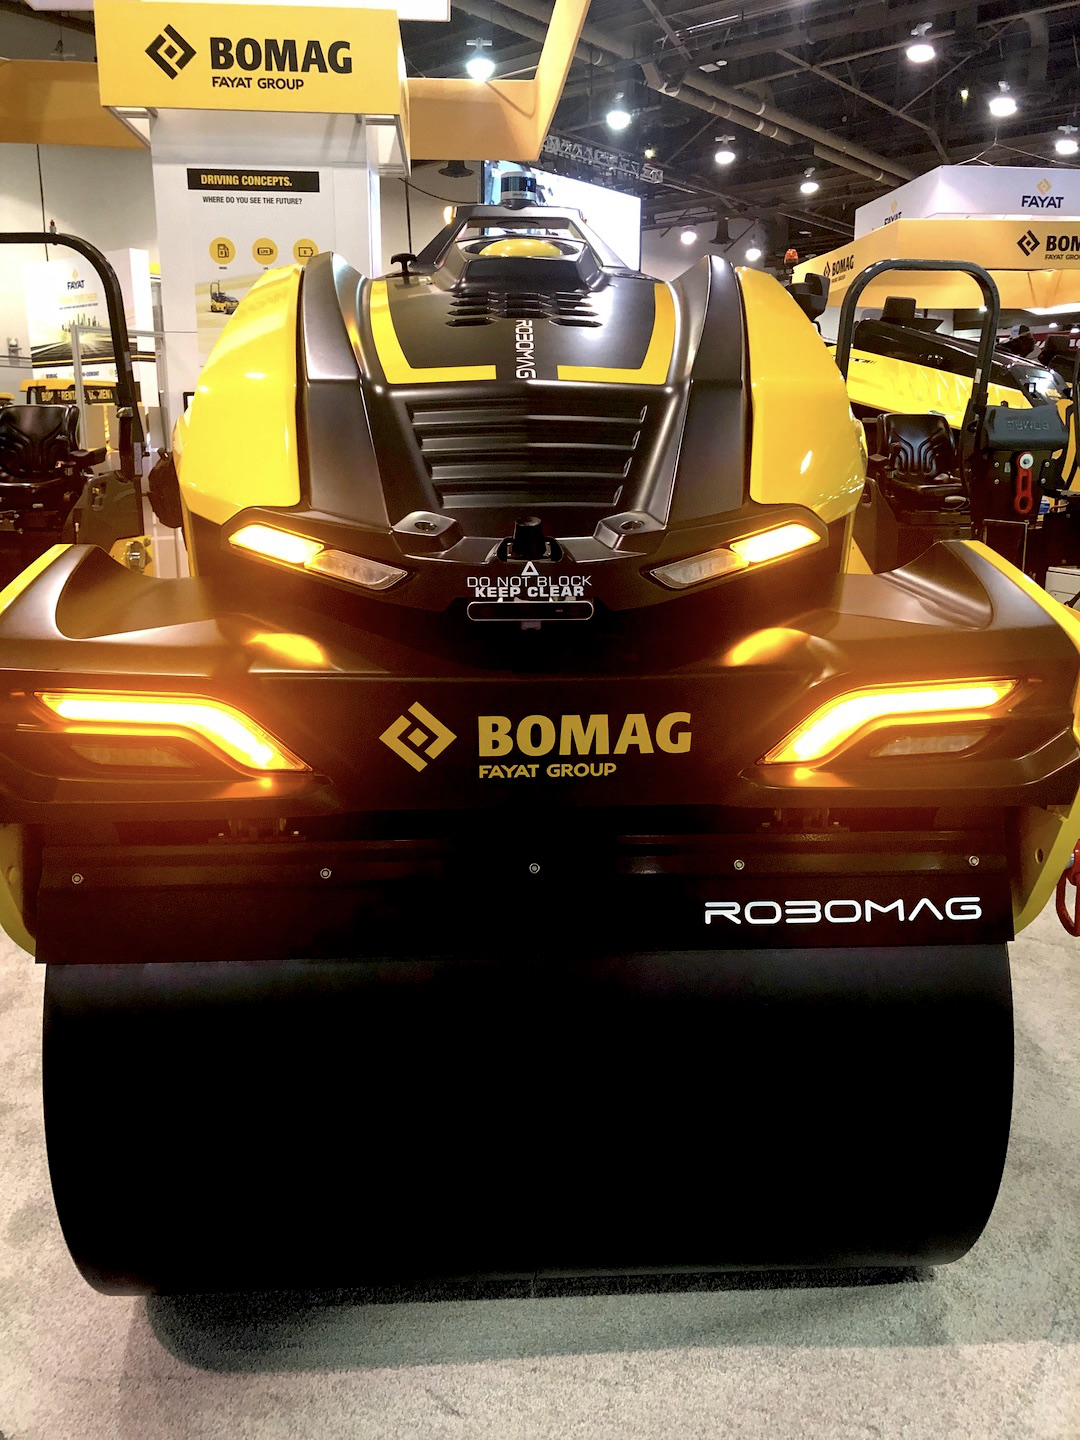 BOMAG's fully autonomous ROBOMAG roller on display